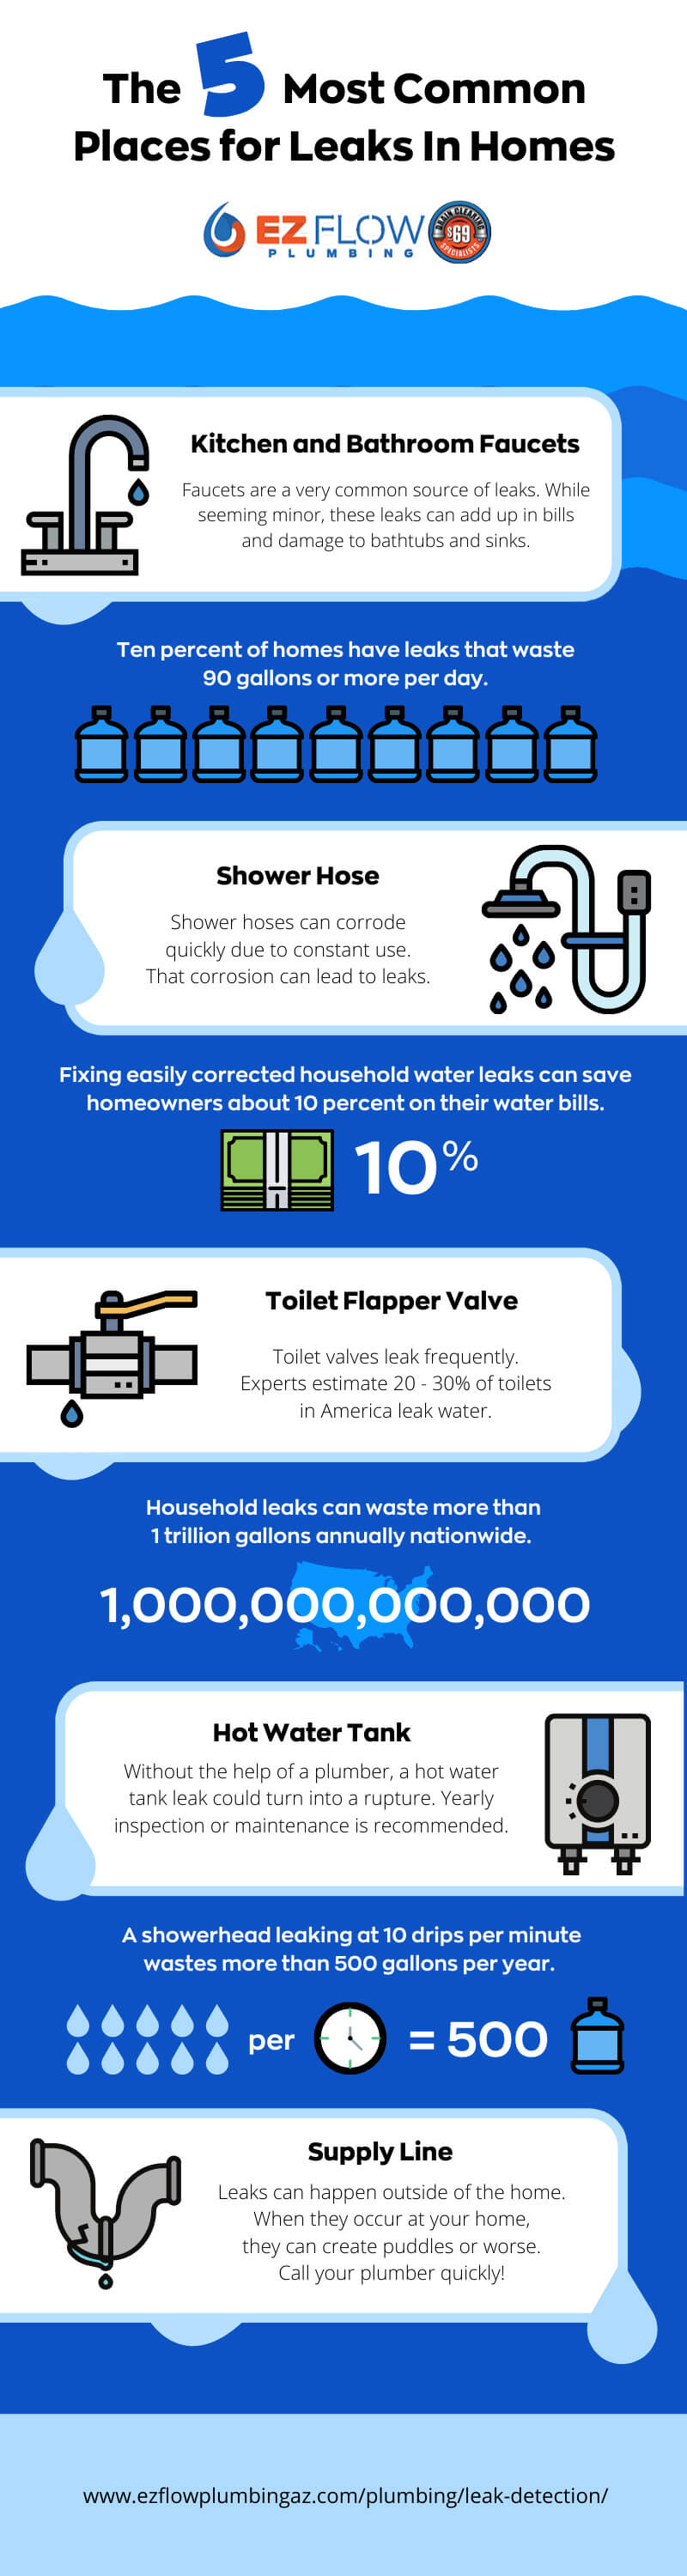 5 most common places for leaks in homes infographic